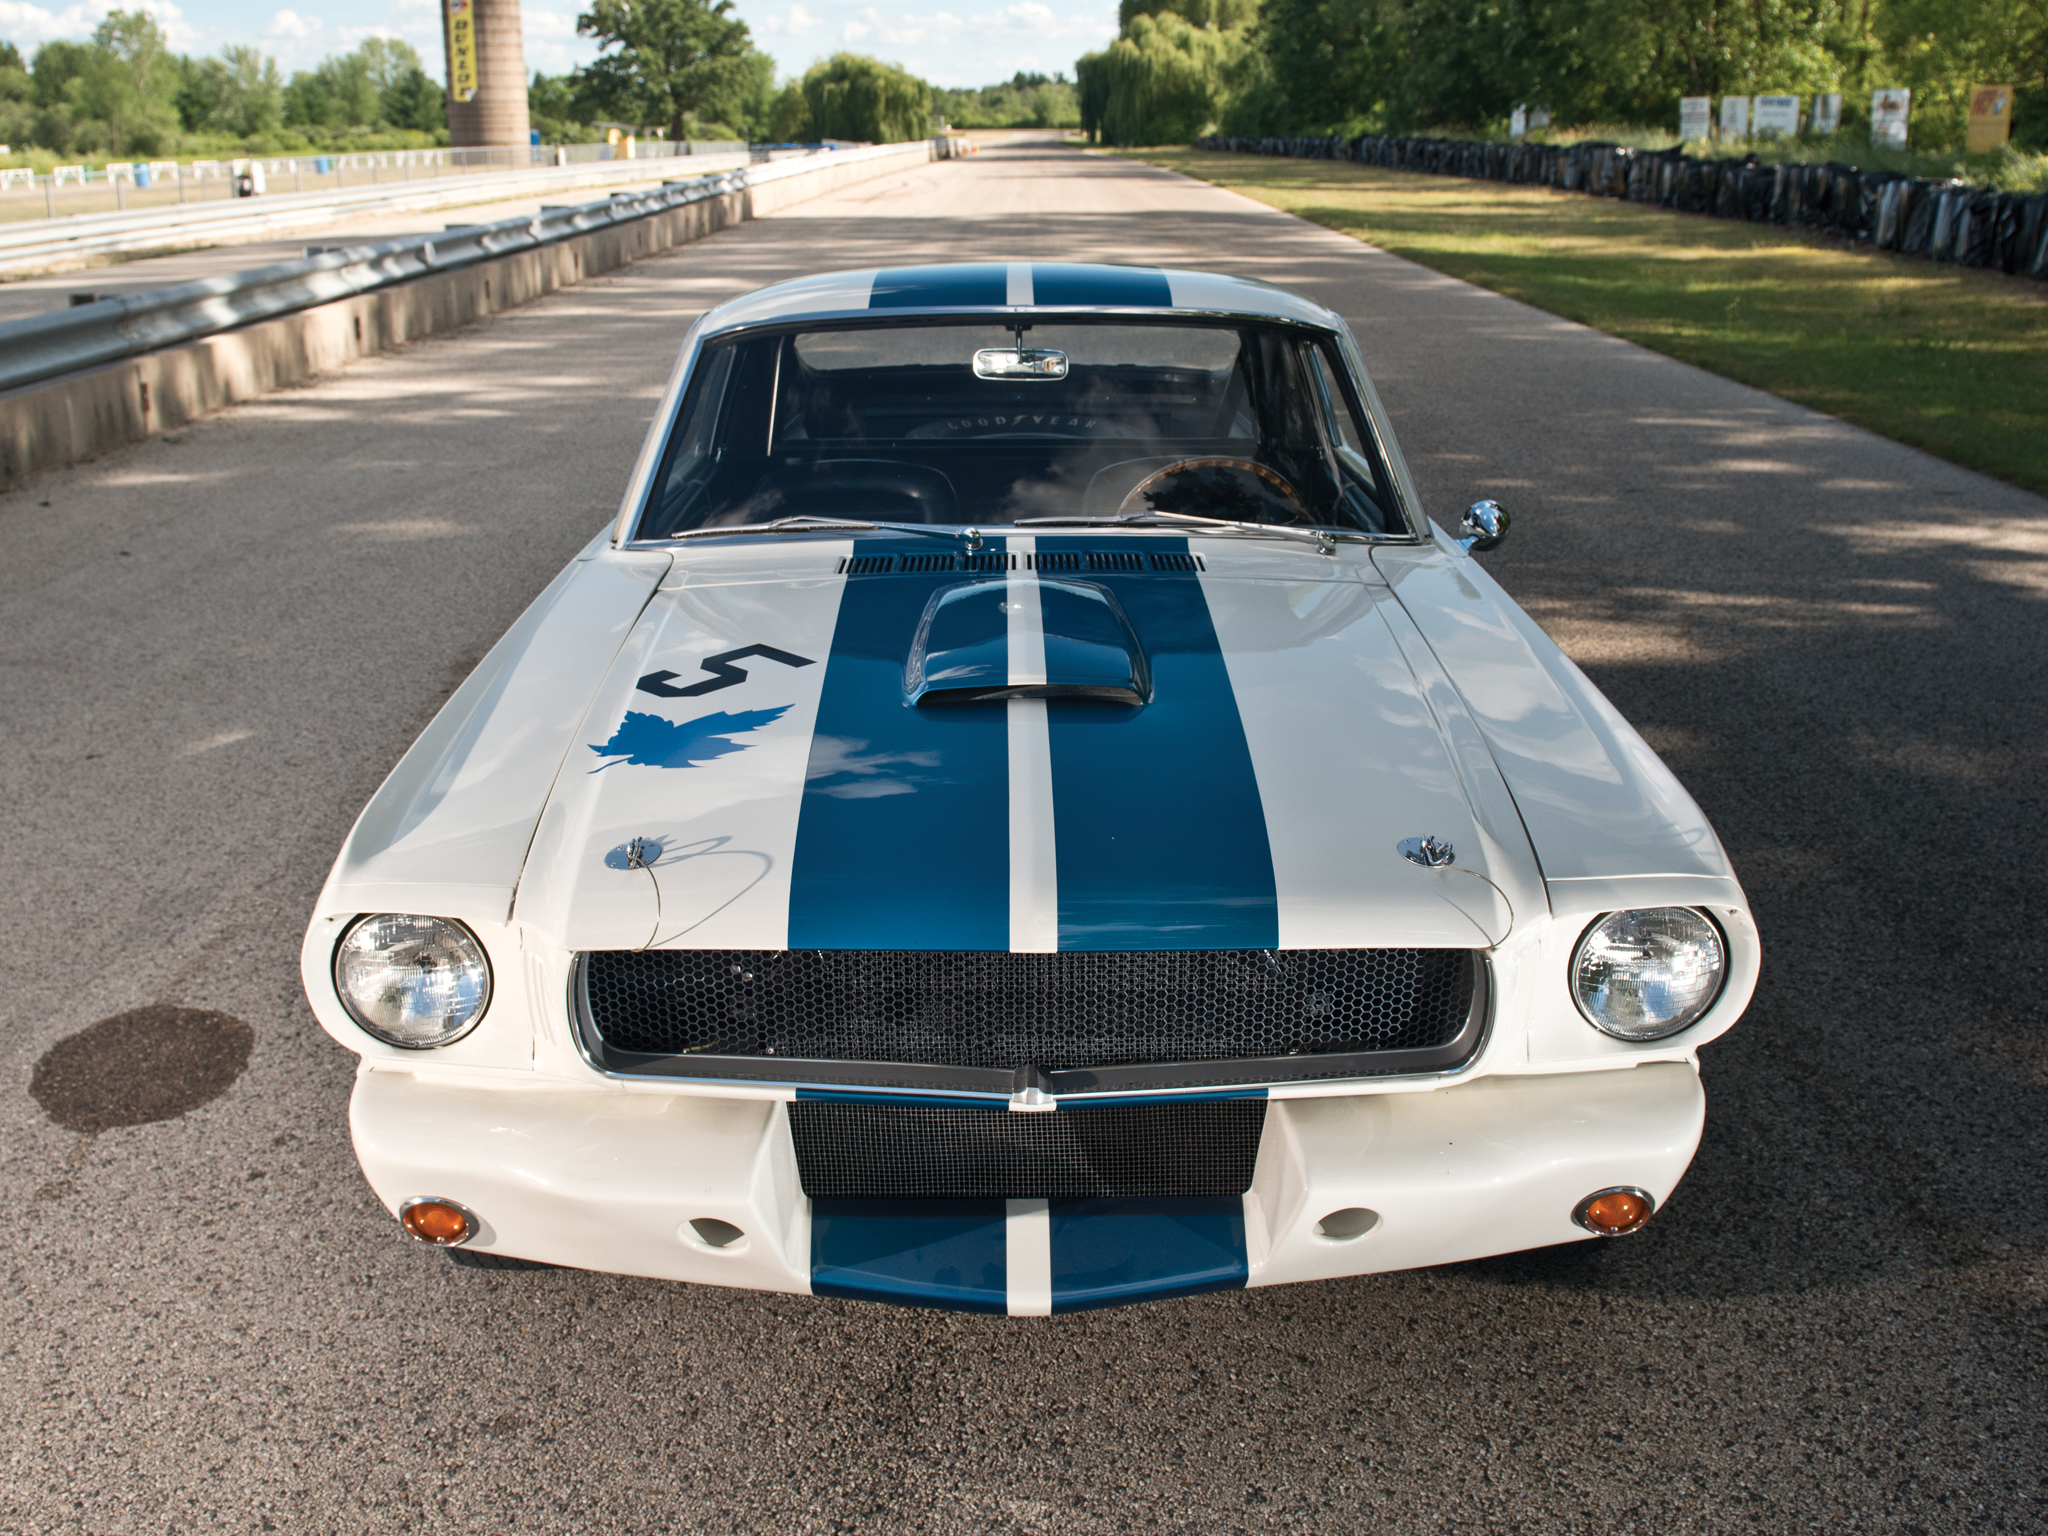 1965, Shelby, Gt350r, Ford, Mustang, Classic, Muscle, Race, Racing, Fs Wallpaper